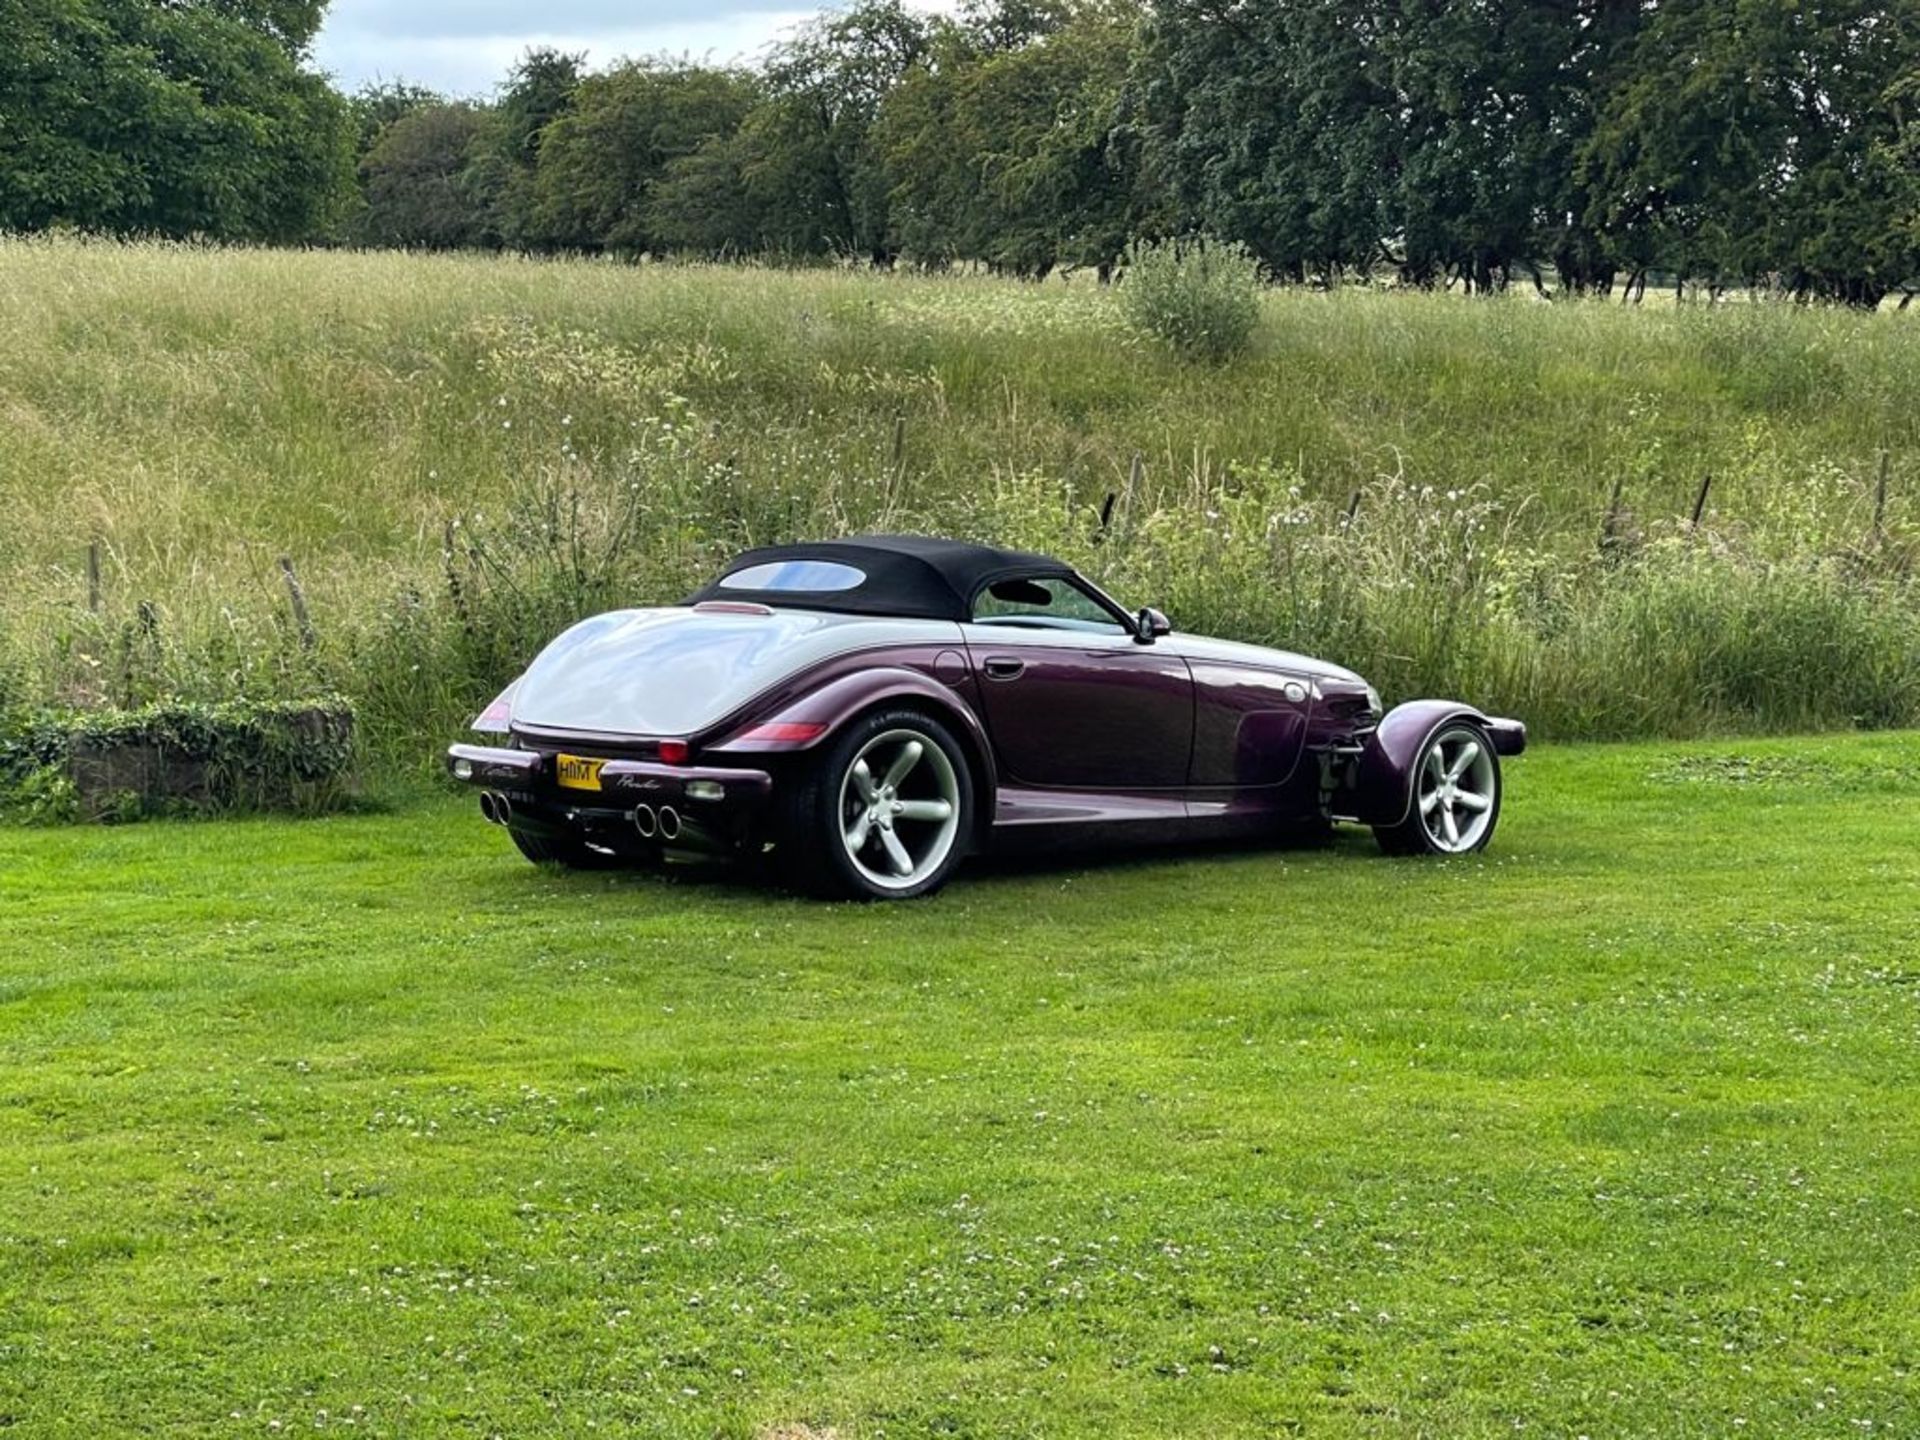 1998 CHRYSLER PLYMOUTH PROWLER V6 2 DOOR CONVERTIBLE, 3500cc PETROL ENGINE, AUTO *NO VAT* - Image 13 of 32